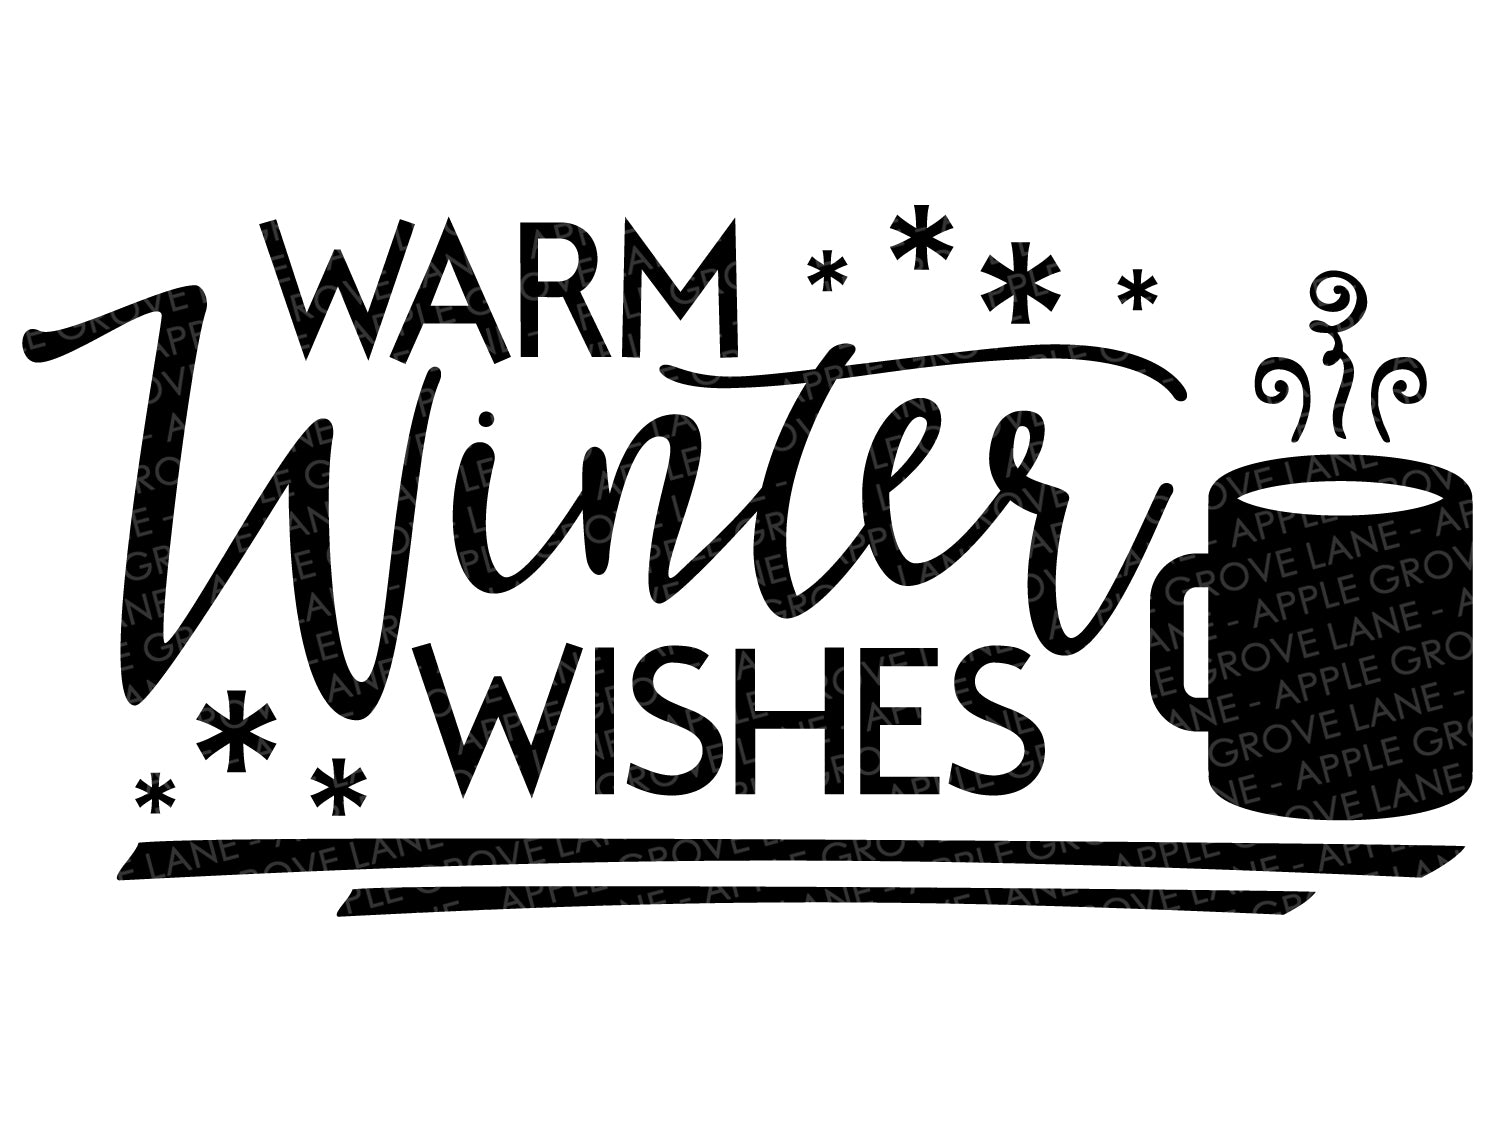 Download Warm Winter Wishes Svg Hot Chocolate Svg Christmas Svg Coffee Sv Apple Grove Lane